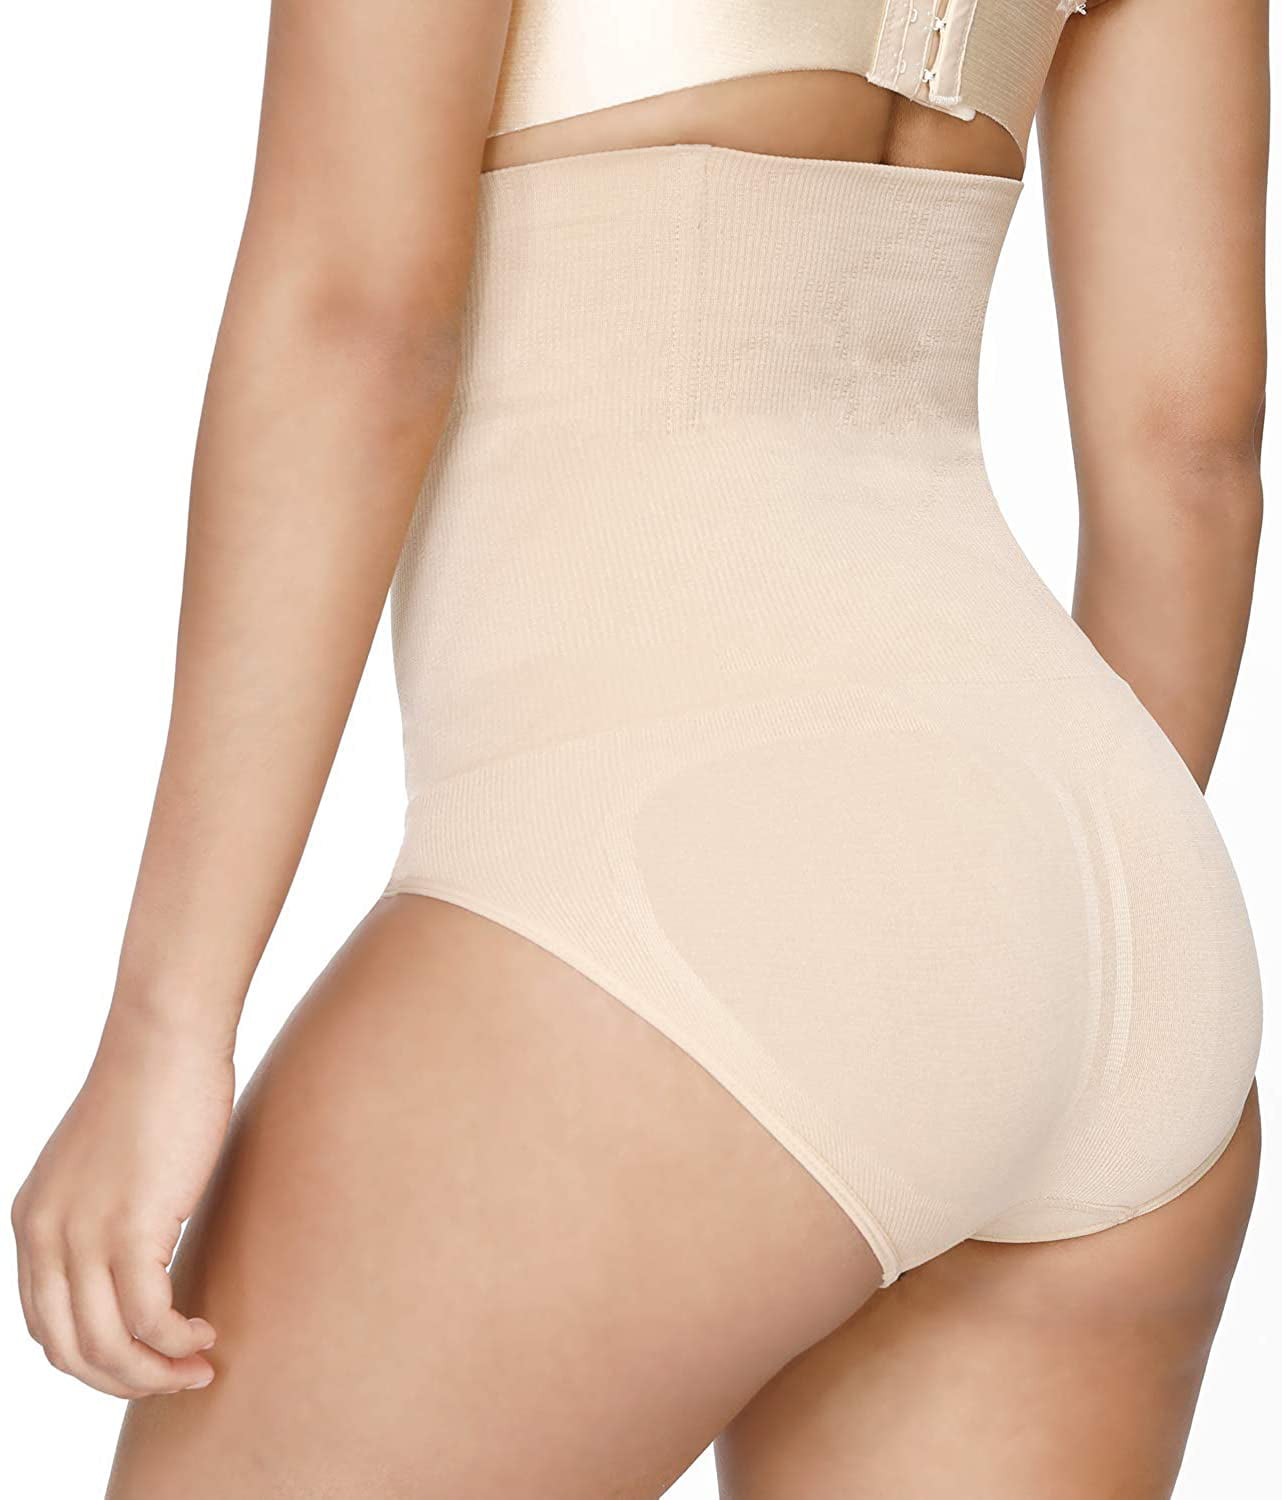 Plus Size Womens Waist Trainer Pad Butt Lifter High Tummy Control Panties  Body Shaper Shapewear Sexy Butt Panties S 6XL From Svzhm, $33.46